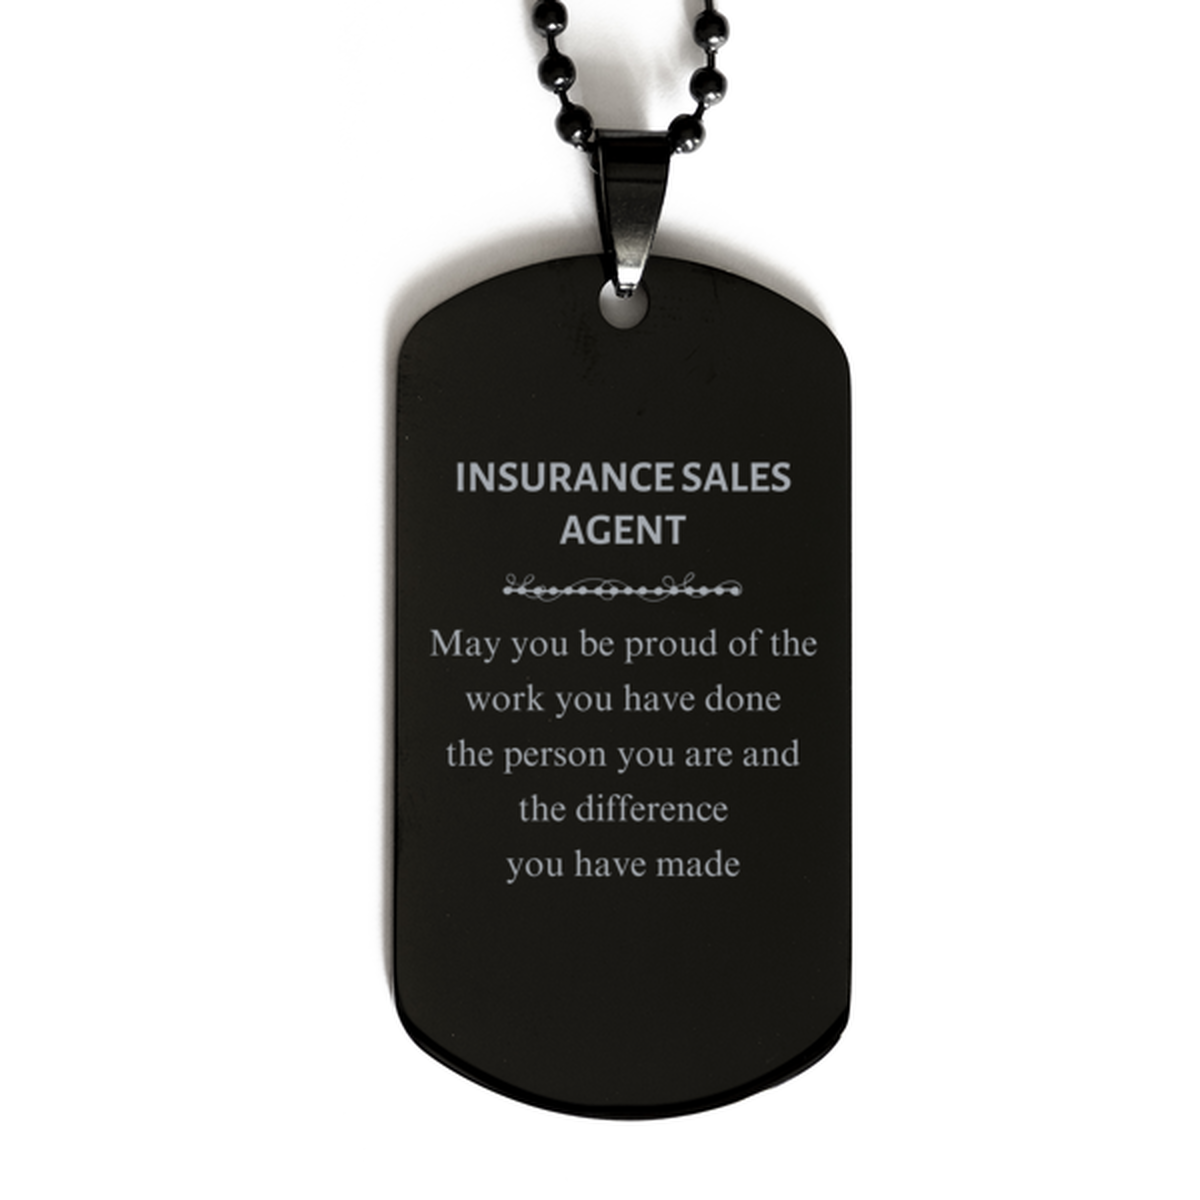 Insurance Sales Agent May you be proud of the work you have done, Retirement Insurance Sales Agent Black Dog Tag for Colleague Appreciation Gifts Amazing for Insurance Sales Agent